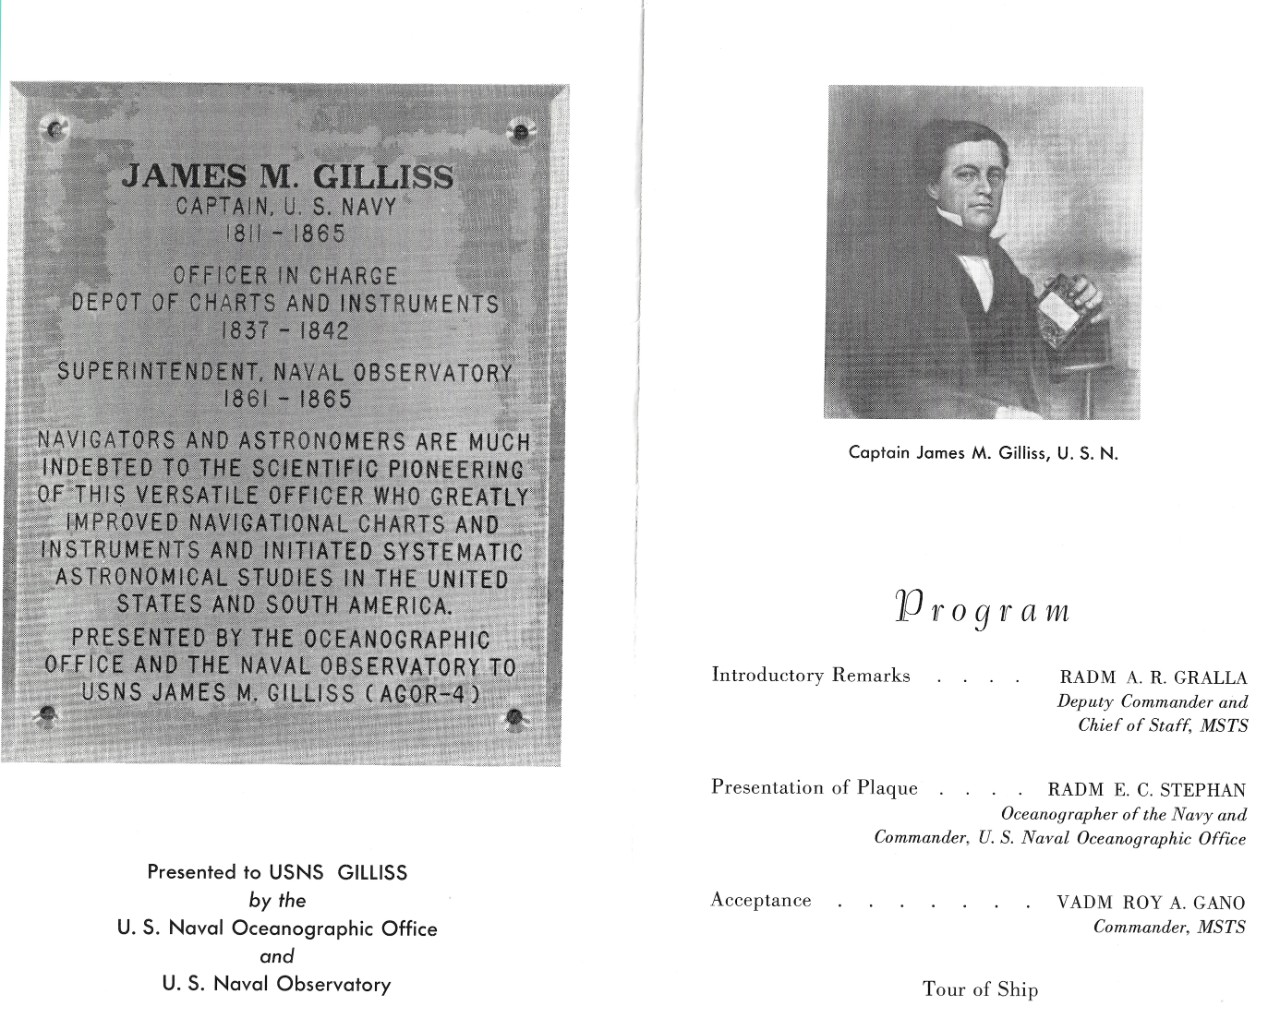 USNS James M. Gilliss (T-AGOR-4) Plaque Presentation Pamphlet, Interior. National Museum of the U.S. Navy Archives.